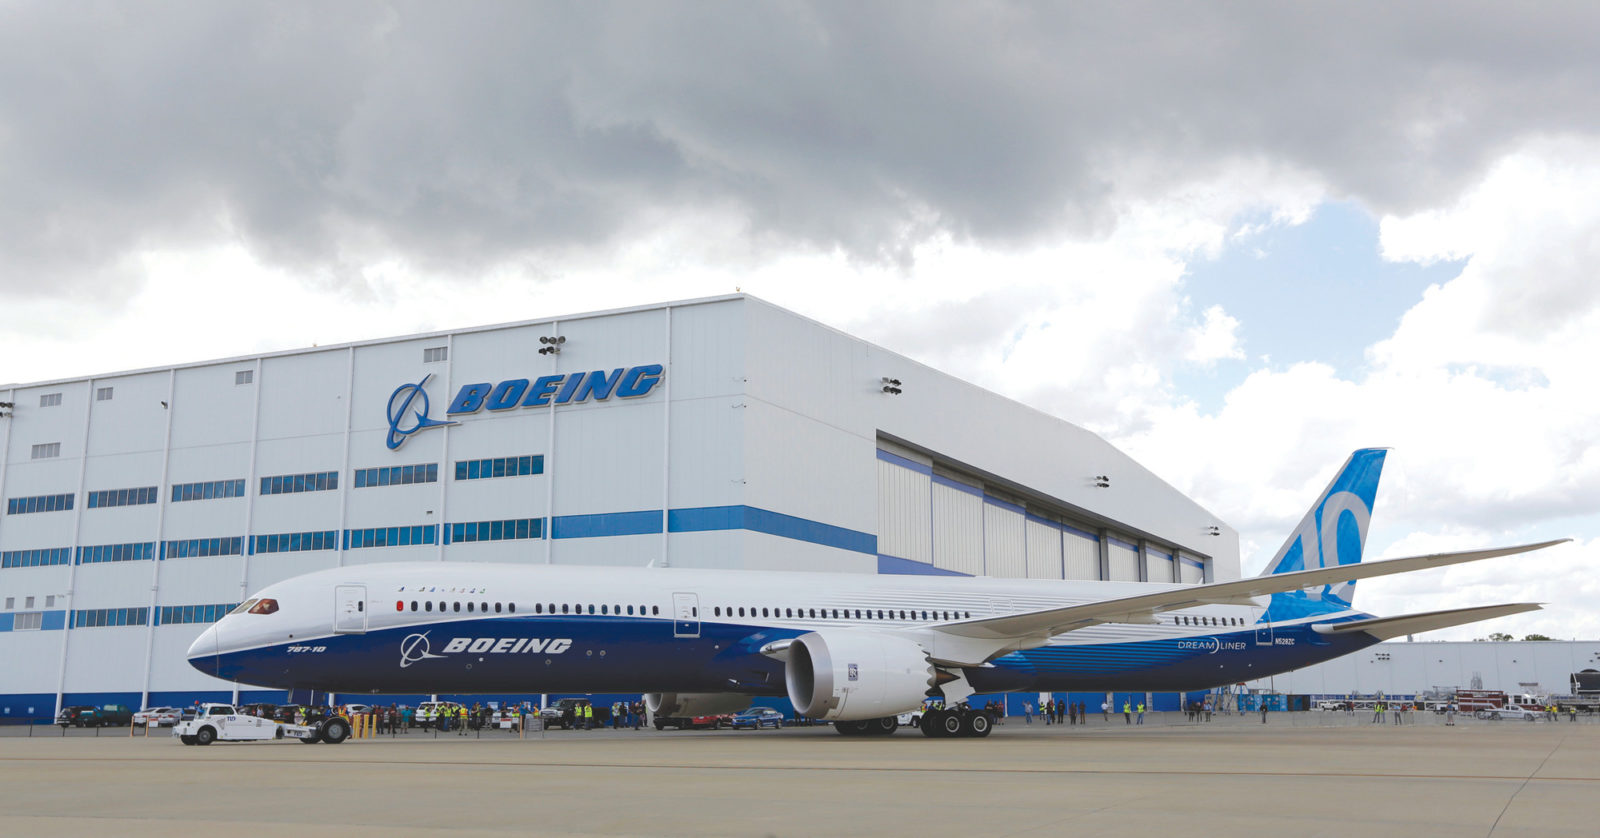 FILE - In this March 31, 2017, file photo, Boeing employees stand near the new Boeing 787-10 Dreamliner at the company's facility in South Carolina after conducting its first test flight at Charleston International Airport in North Charleston, S.C. The United States' top labor official made a stop Friday at Boeing's South Carolina facilities, highlighting a new Trump administration commitment to workforce development. On Thursday, July 19, 2018, President Donald Trump signed an executive order asking companies to pledge to invest in work-based education and training like apprenticeships. (AP Photo/Mic Smith, File)